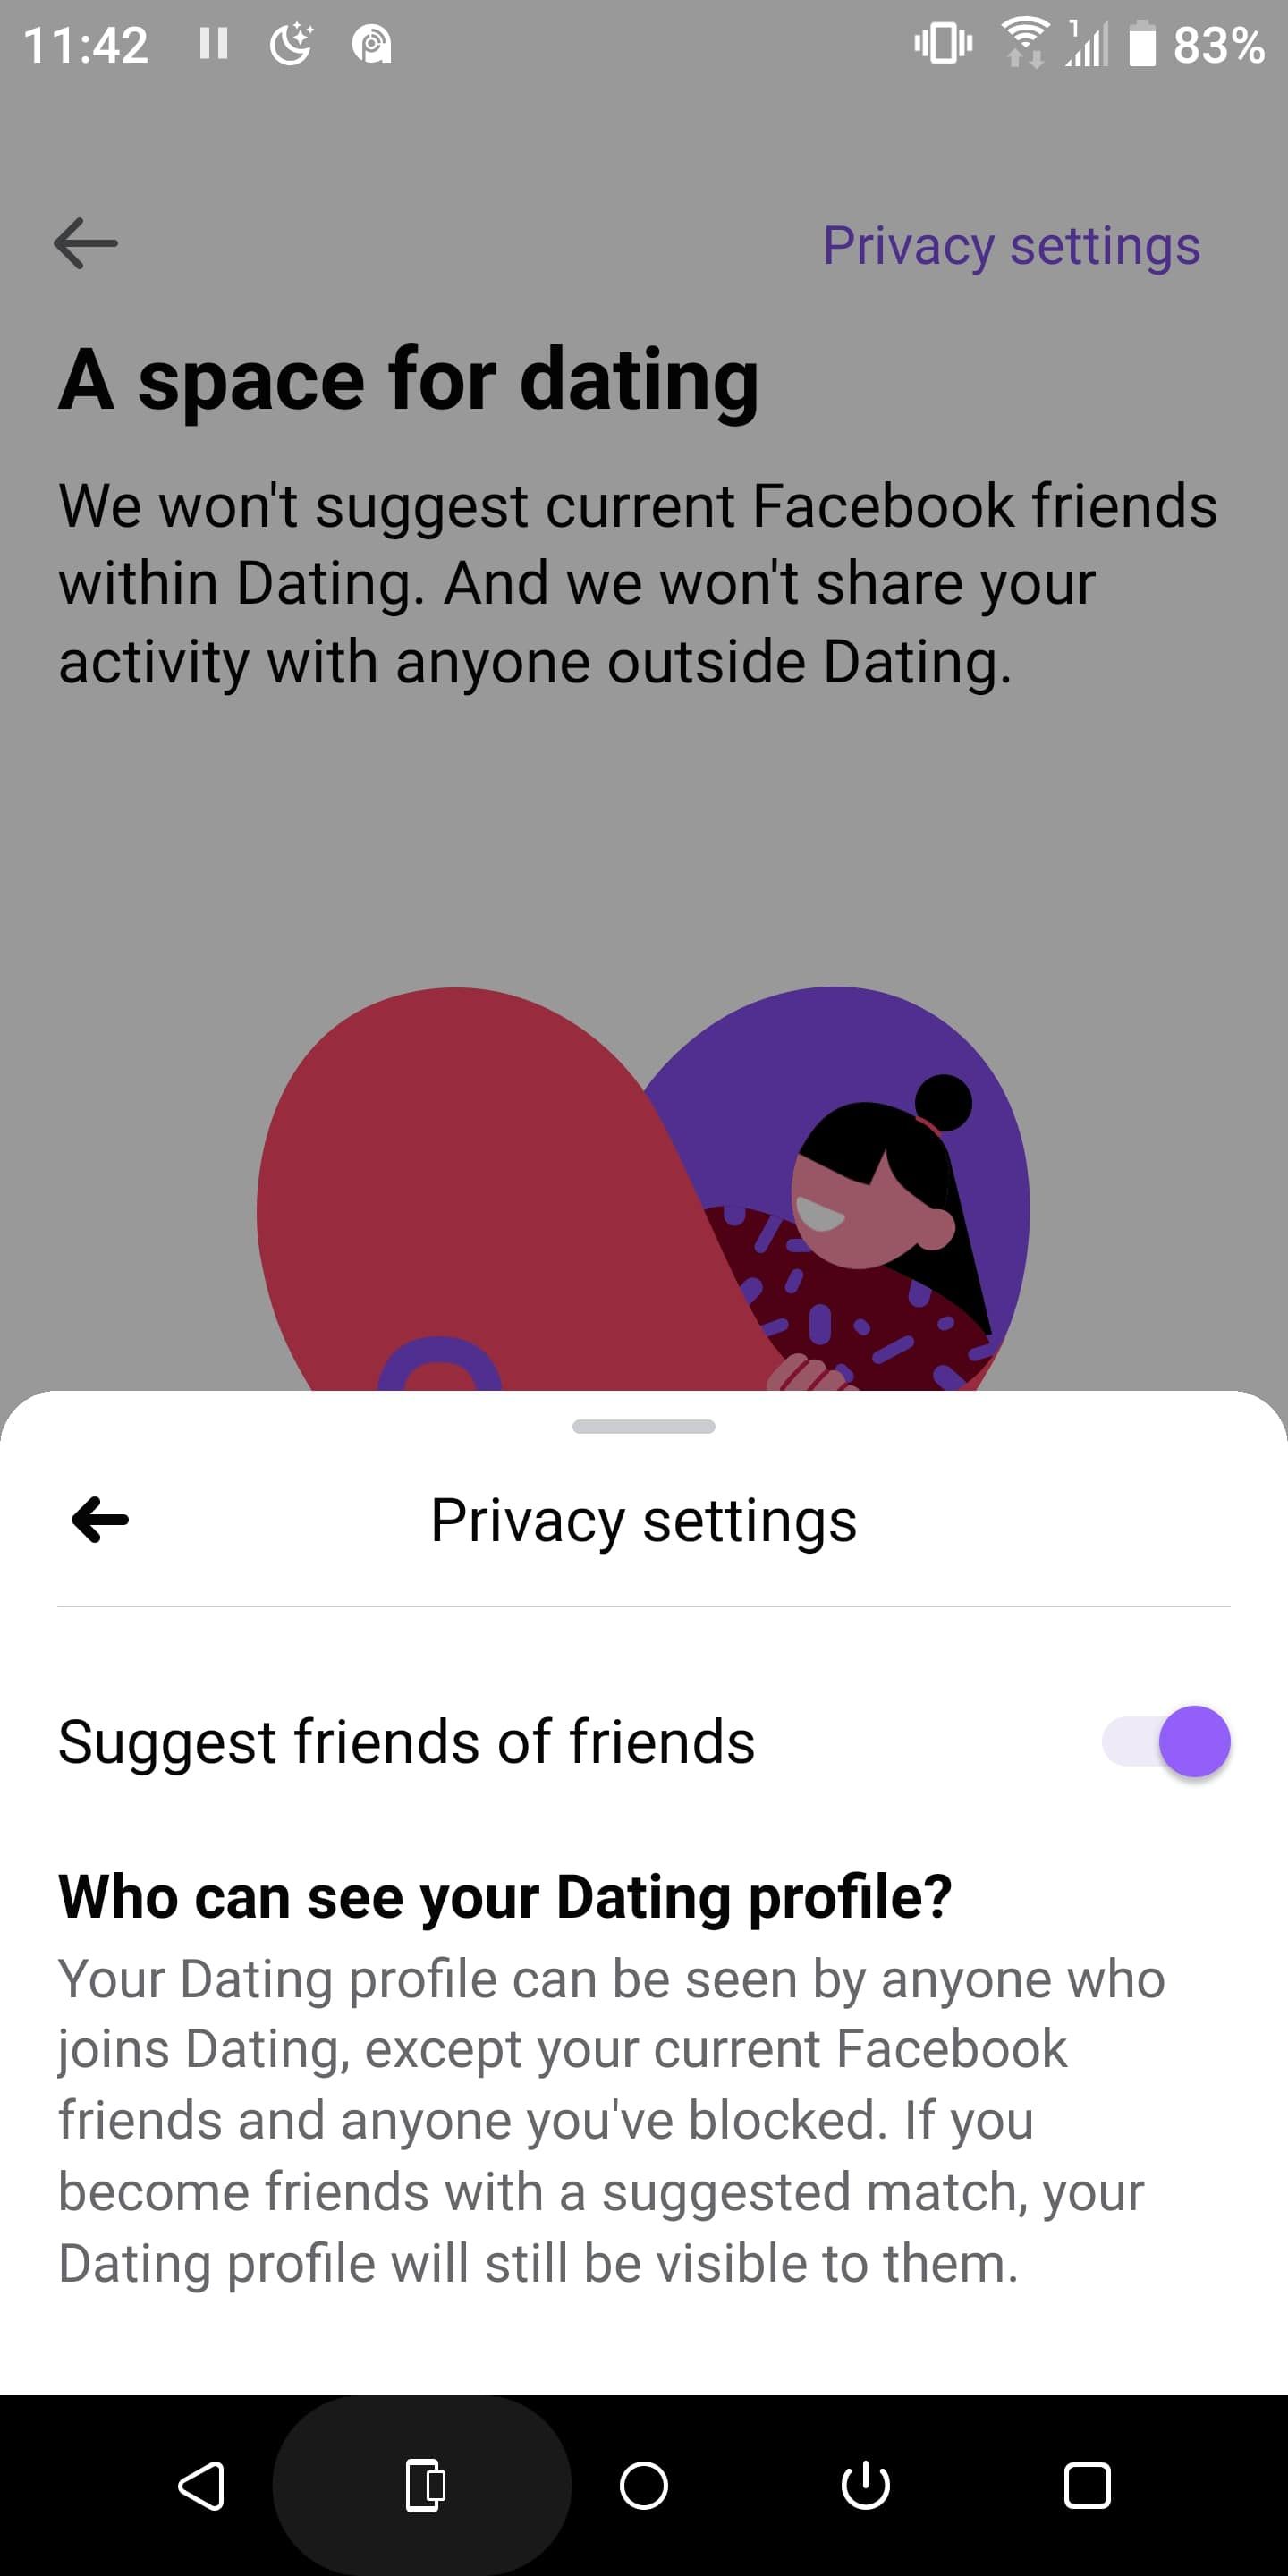 Facebook Dating privacy settings